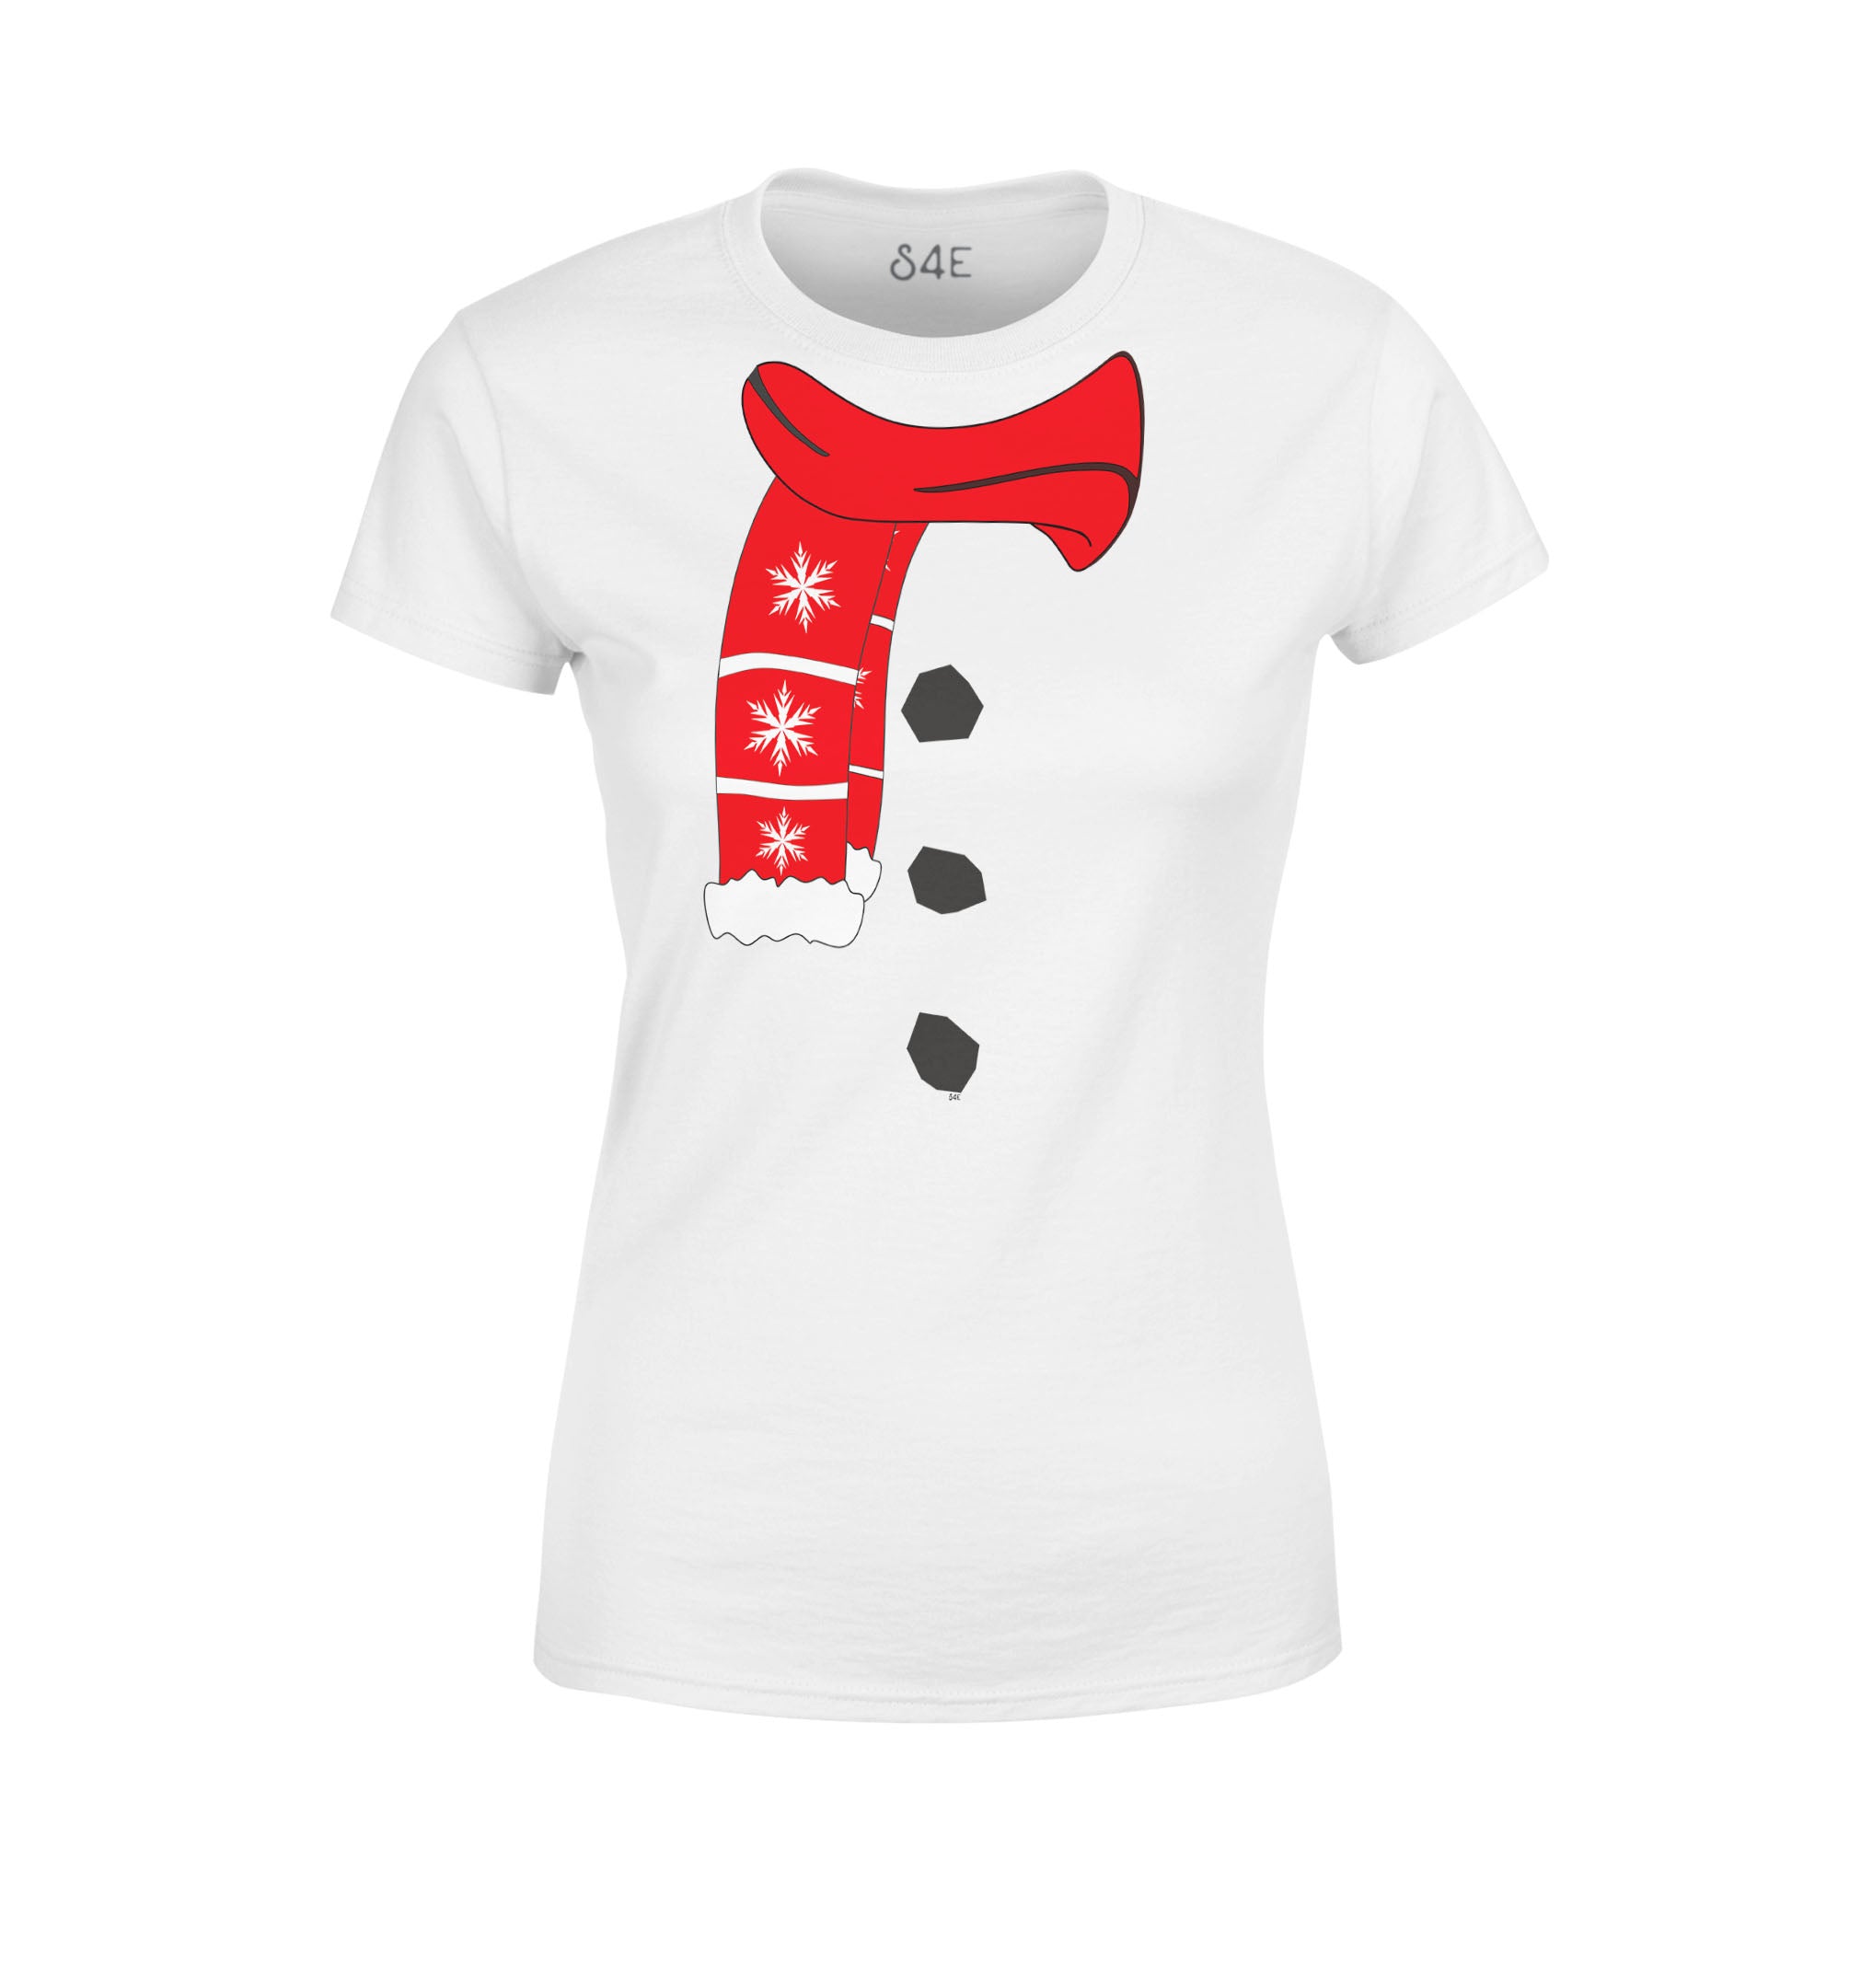 Red Snowflake Scarf Snowman Costume Women's T-Shirt